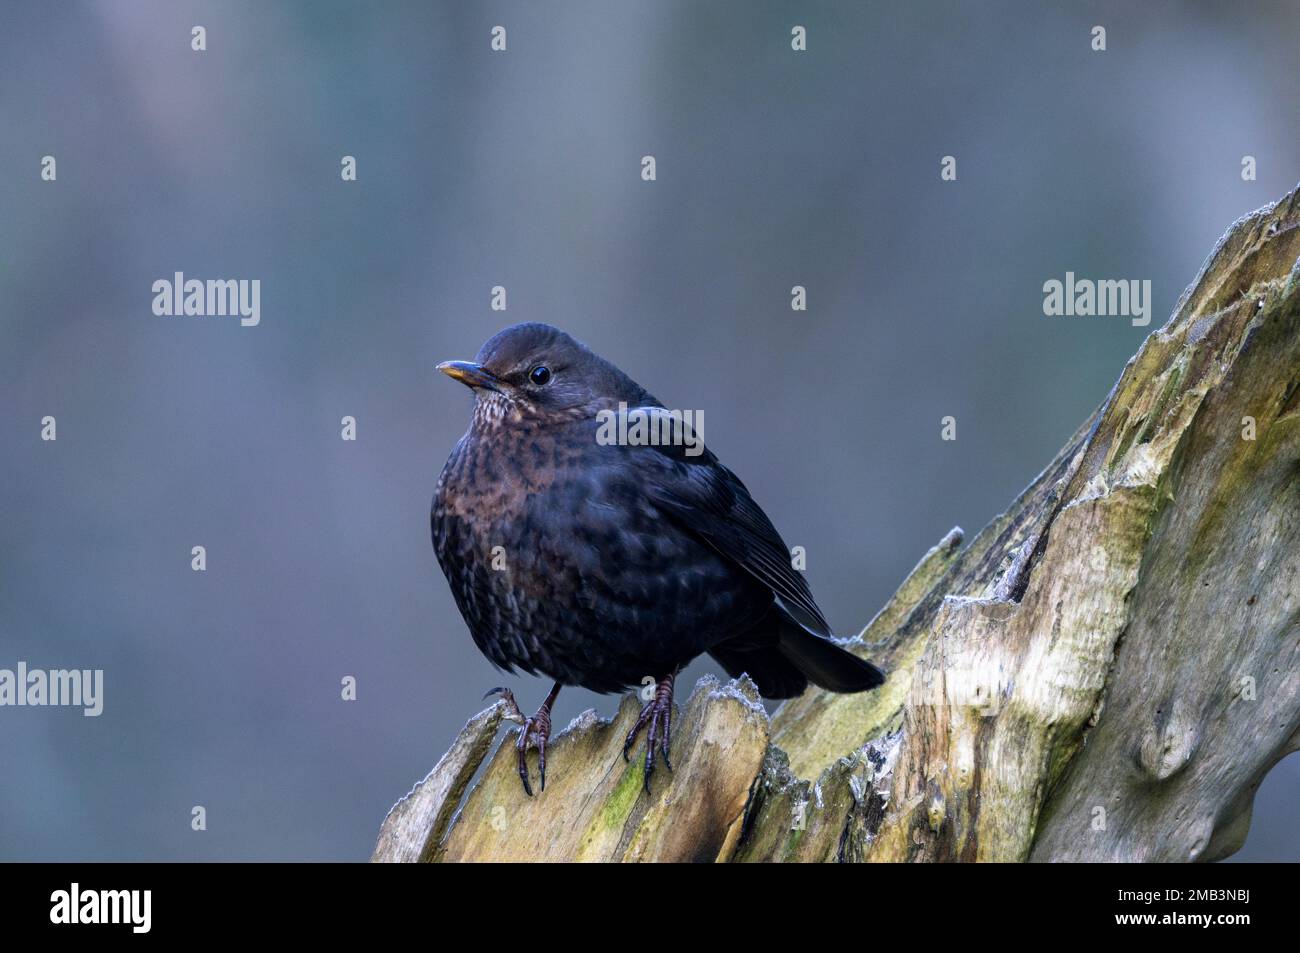 The mottled plumage shows this Blackbird is juvenile and in her first winter. They are common birds of Parks and gardens and thrive with human help. Stock Photo